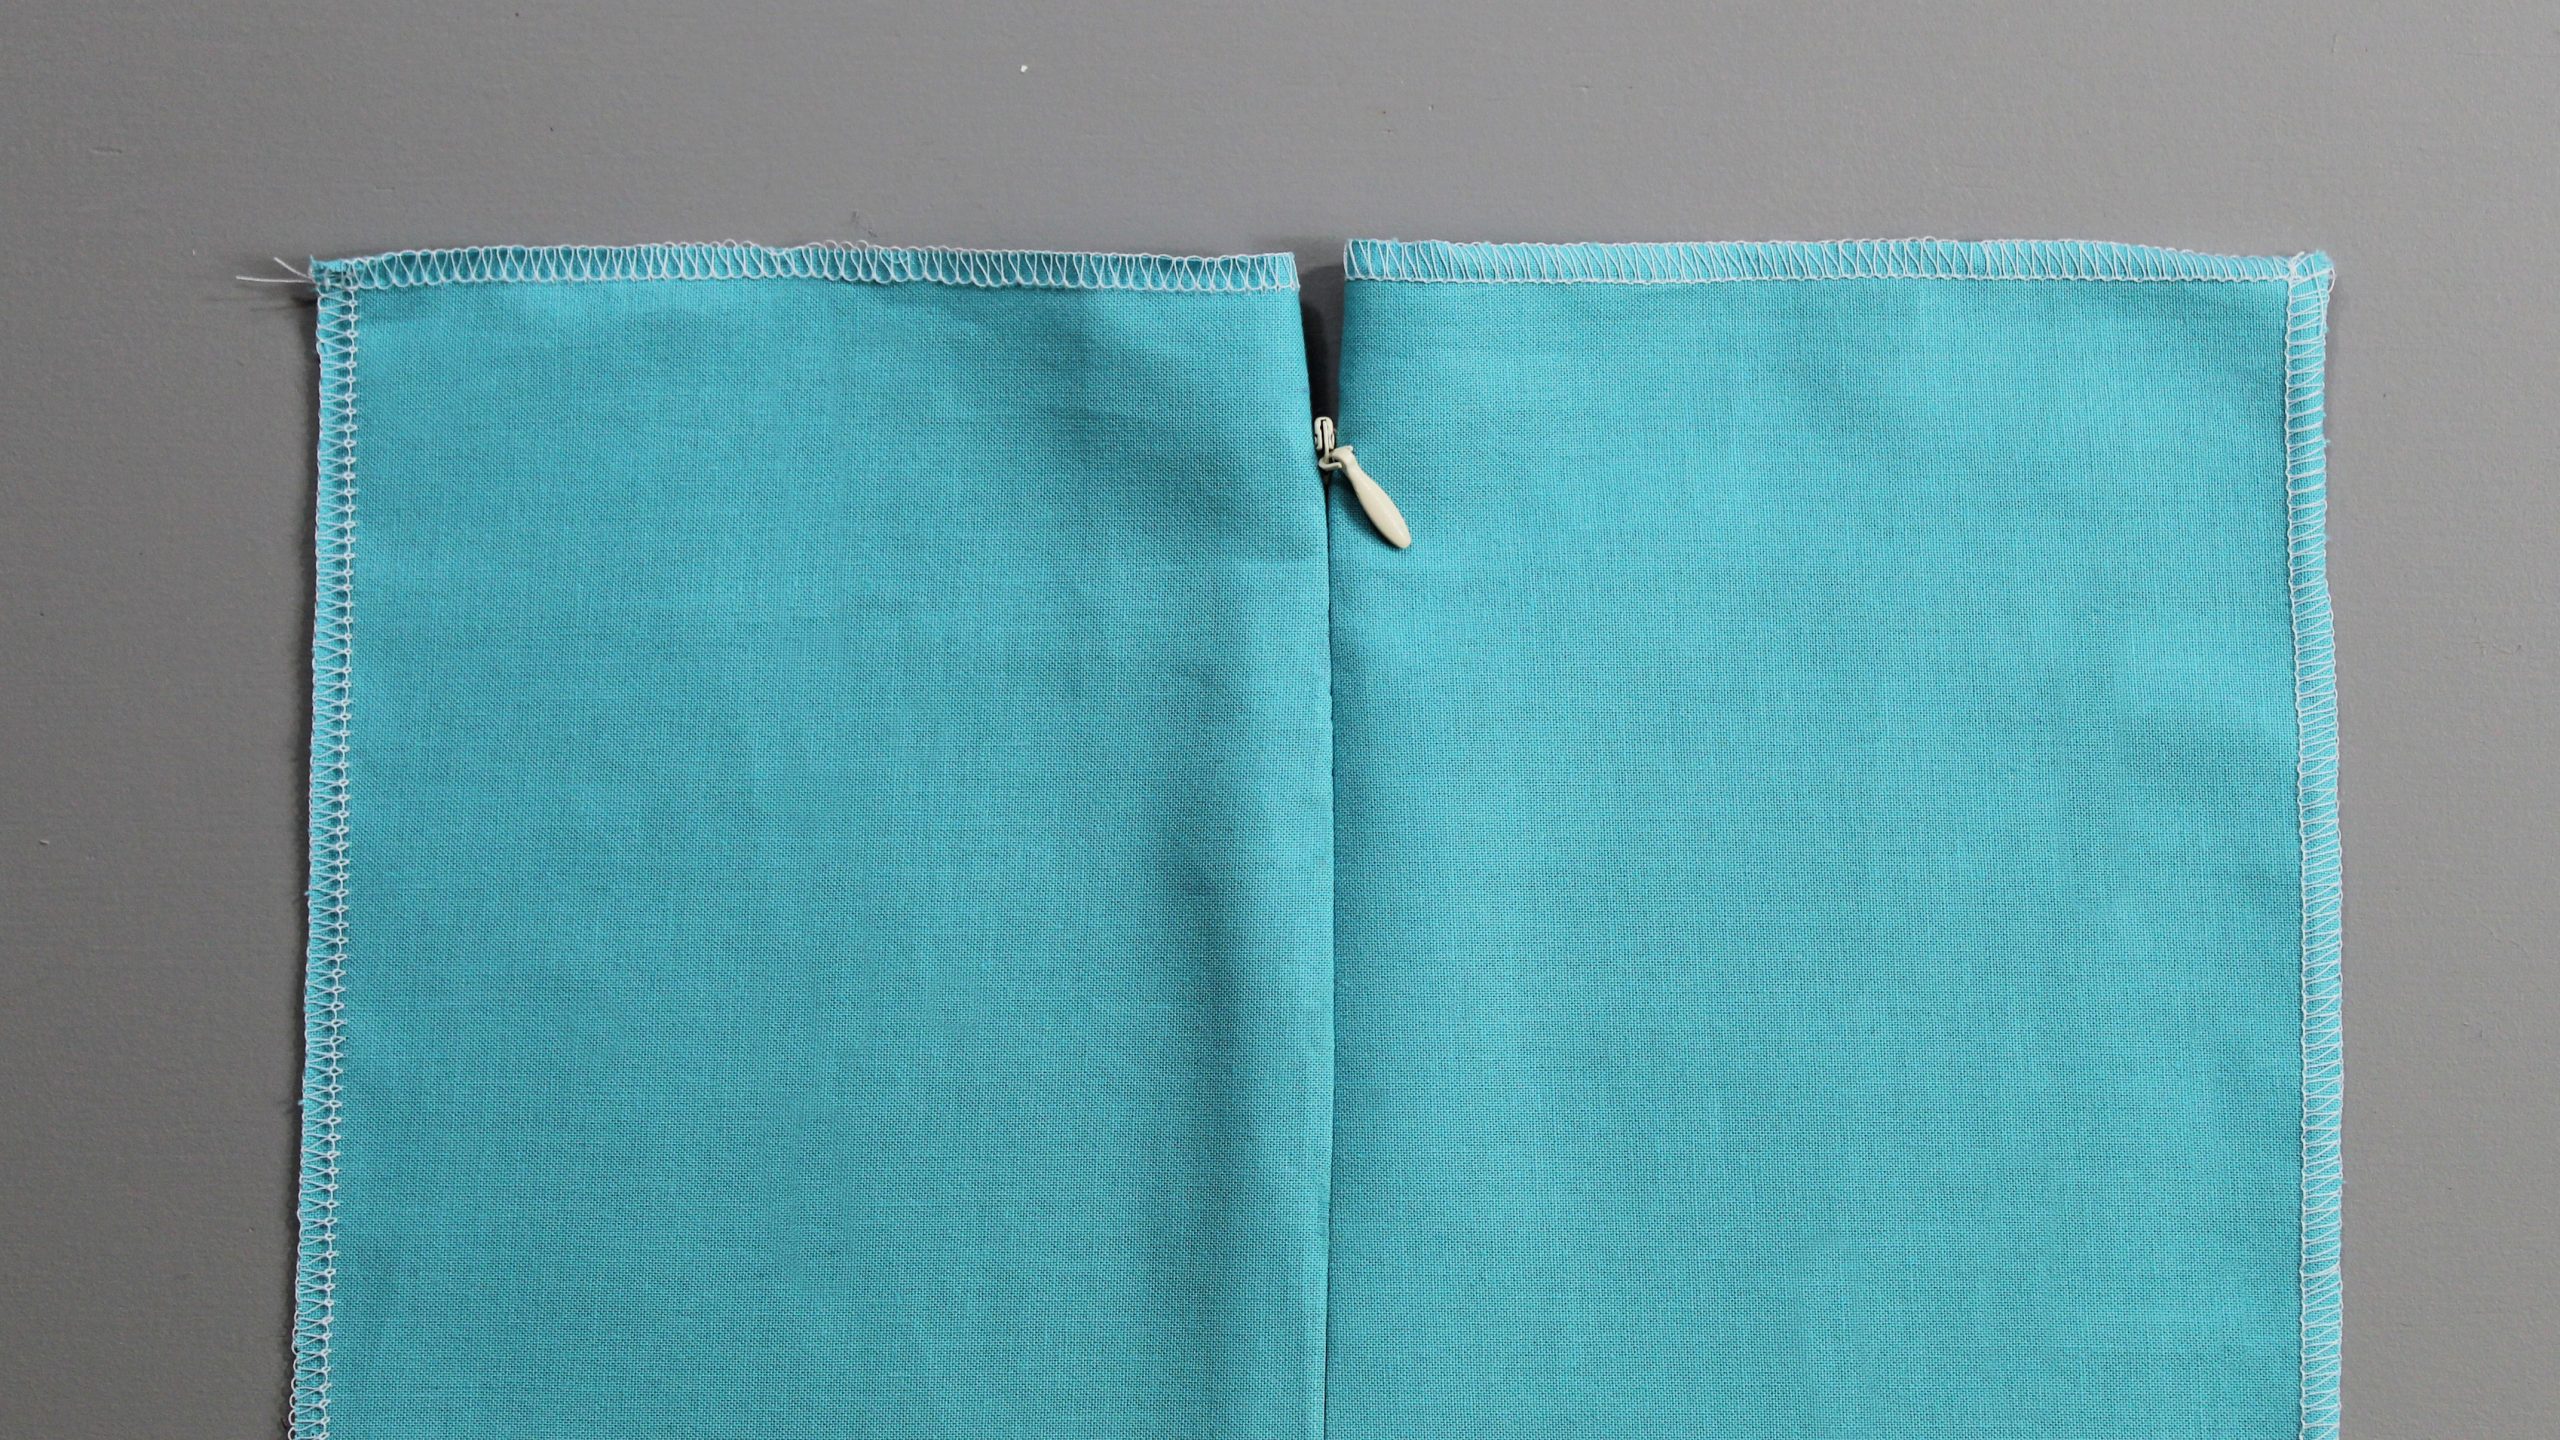 How To Sew A Zipper By Hand? - Quick Tutorial!